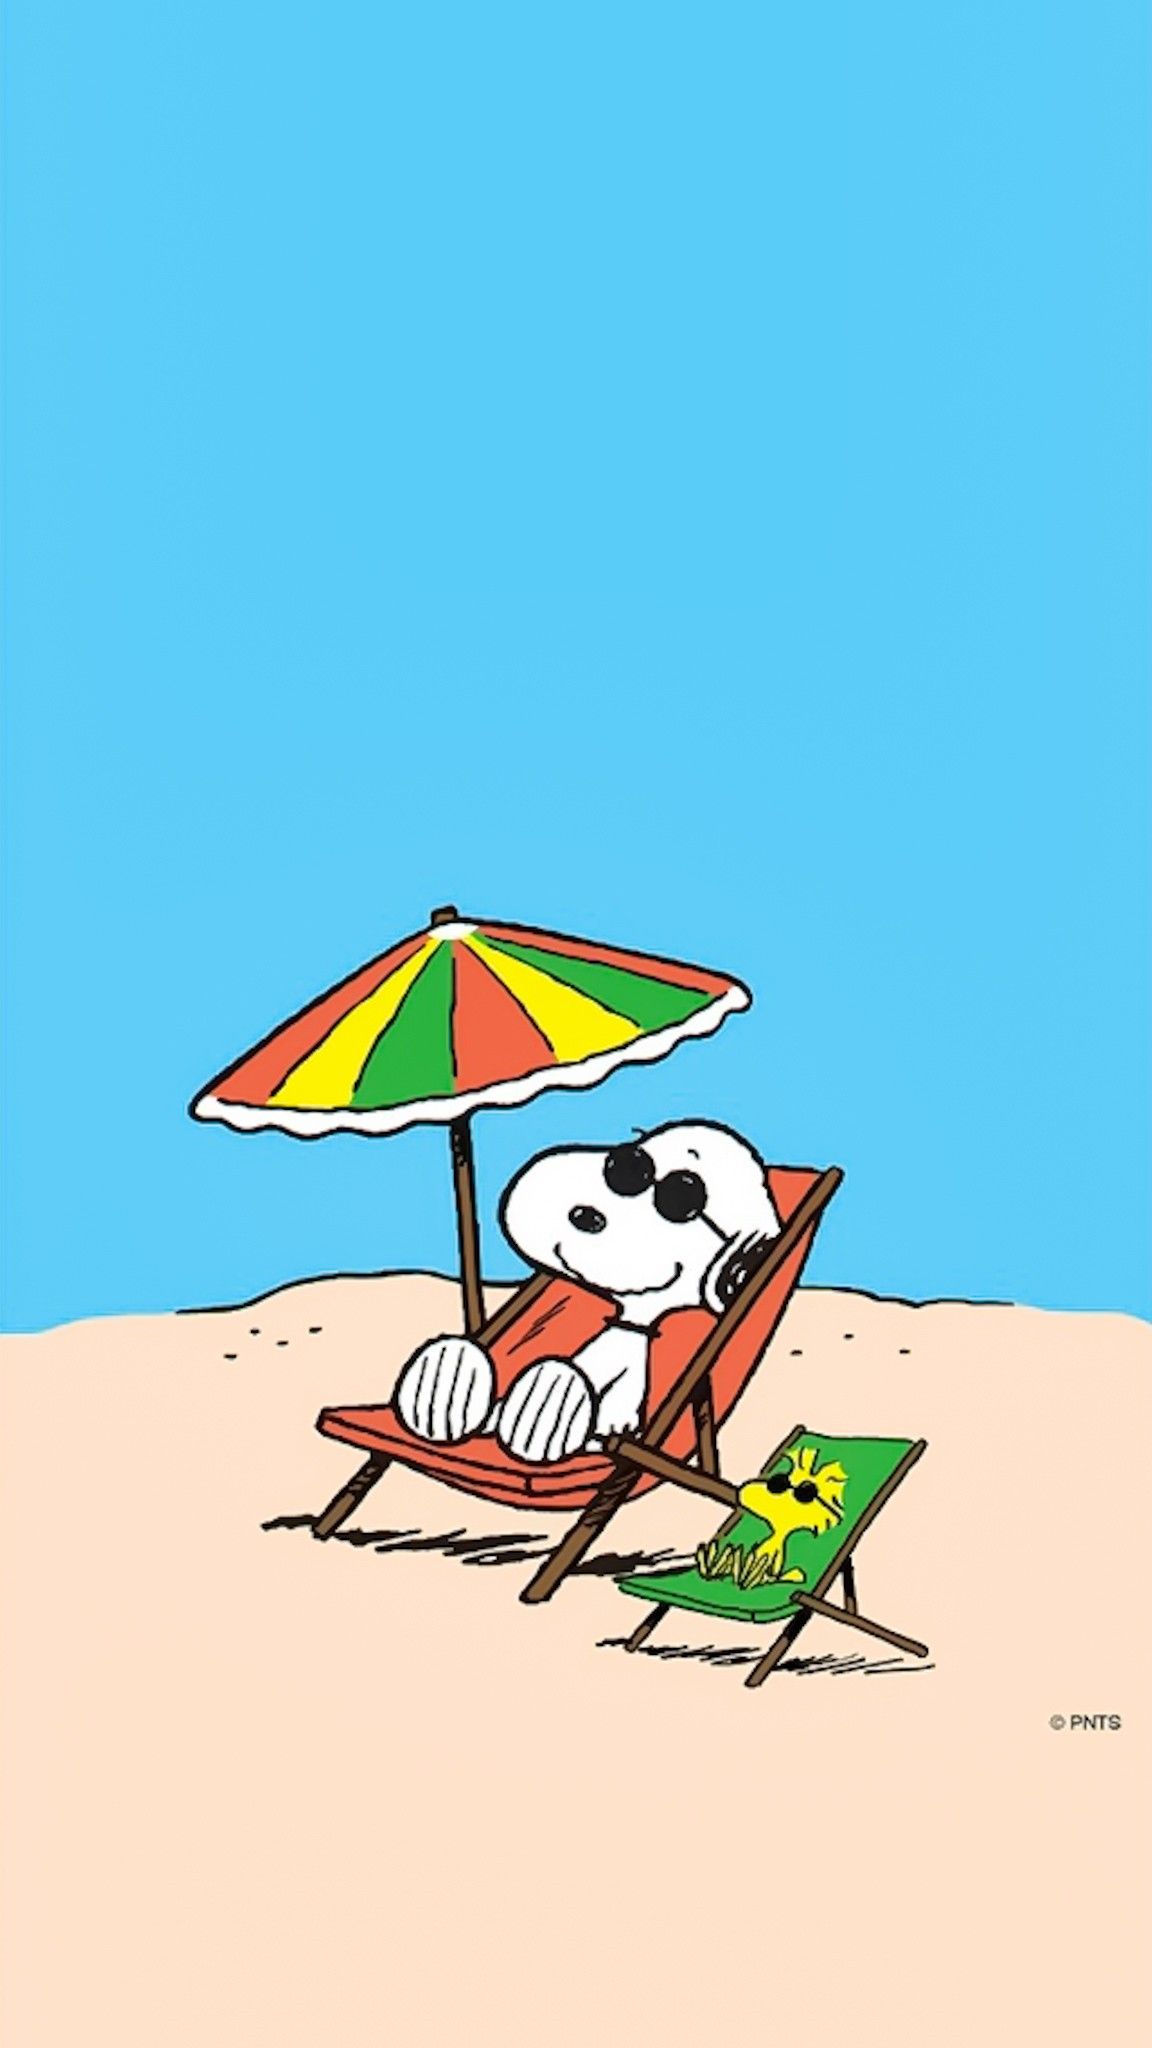 Snoopy. Snoopy wallpaper, Snoopy funny, Peanuts charlie brown snoopy